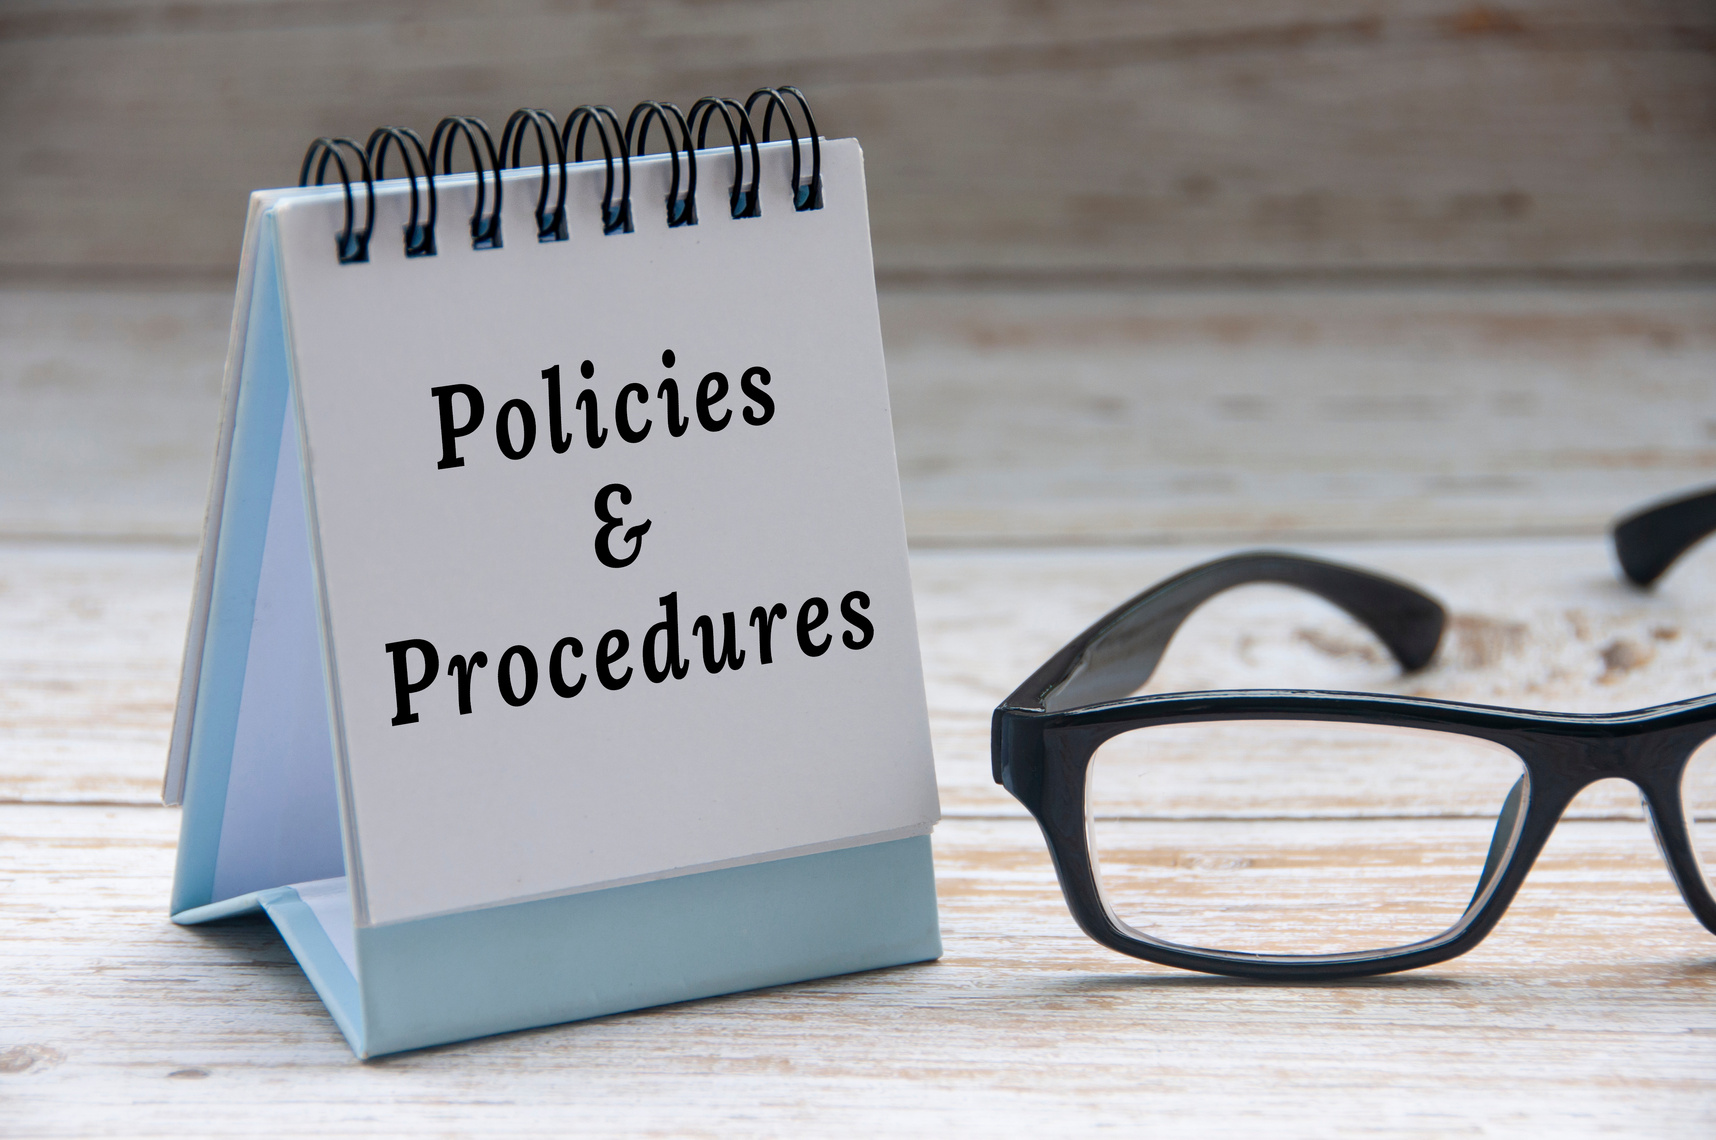 Policies and procedures text on notepad with glasses on white wooden cover background.